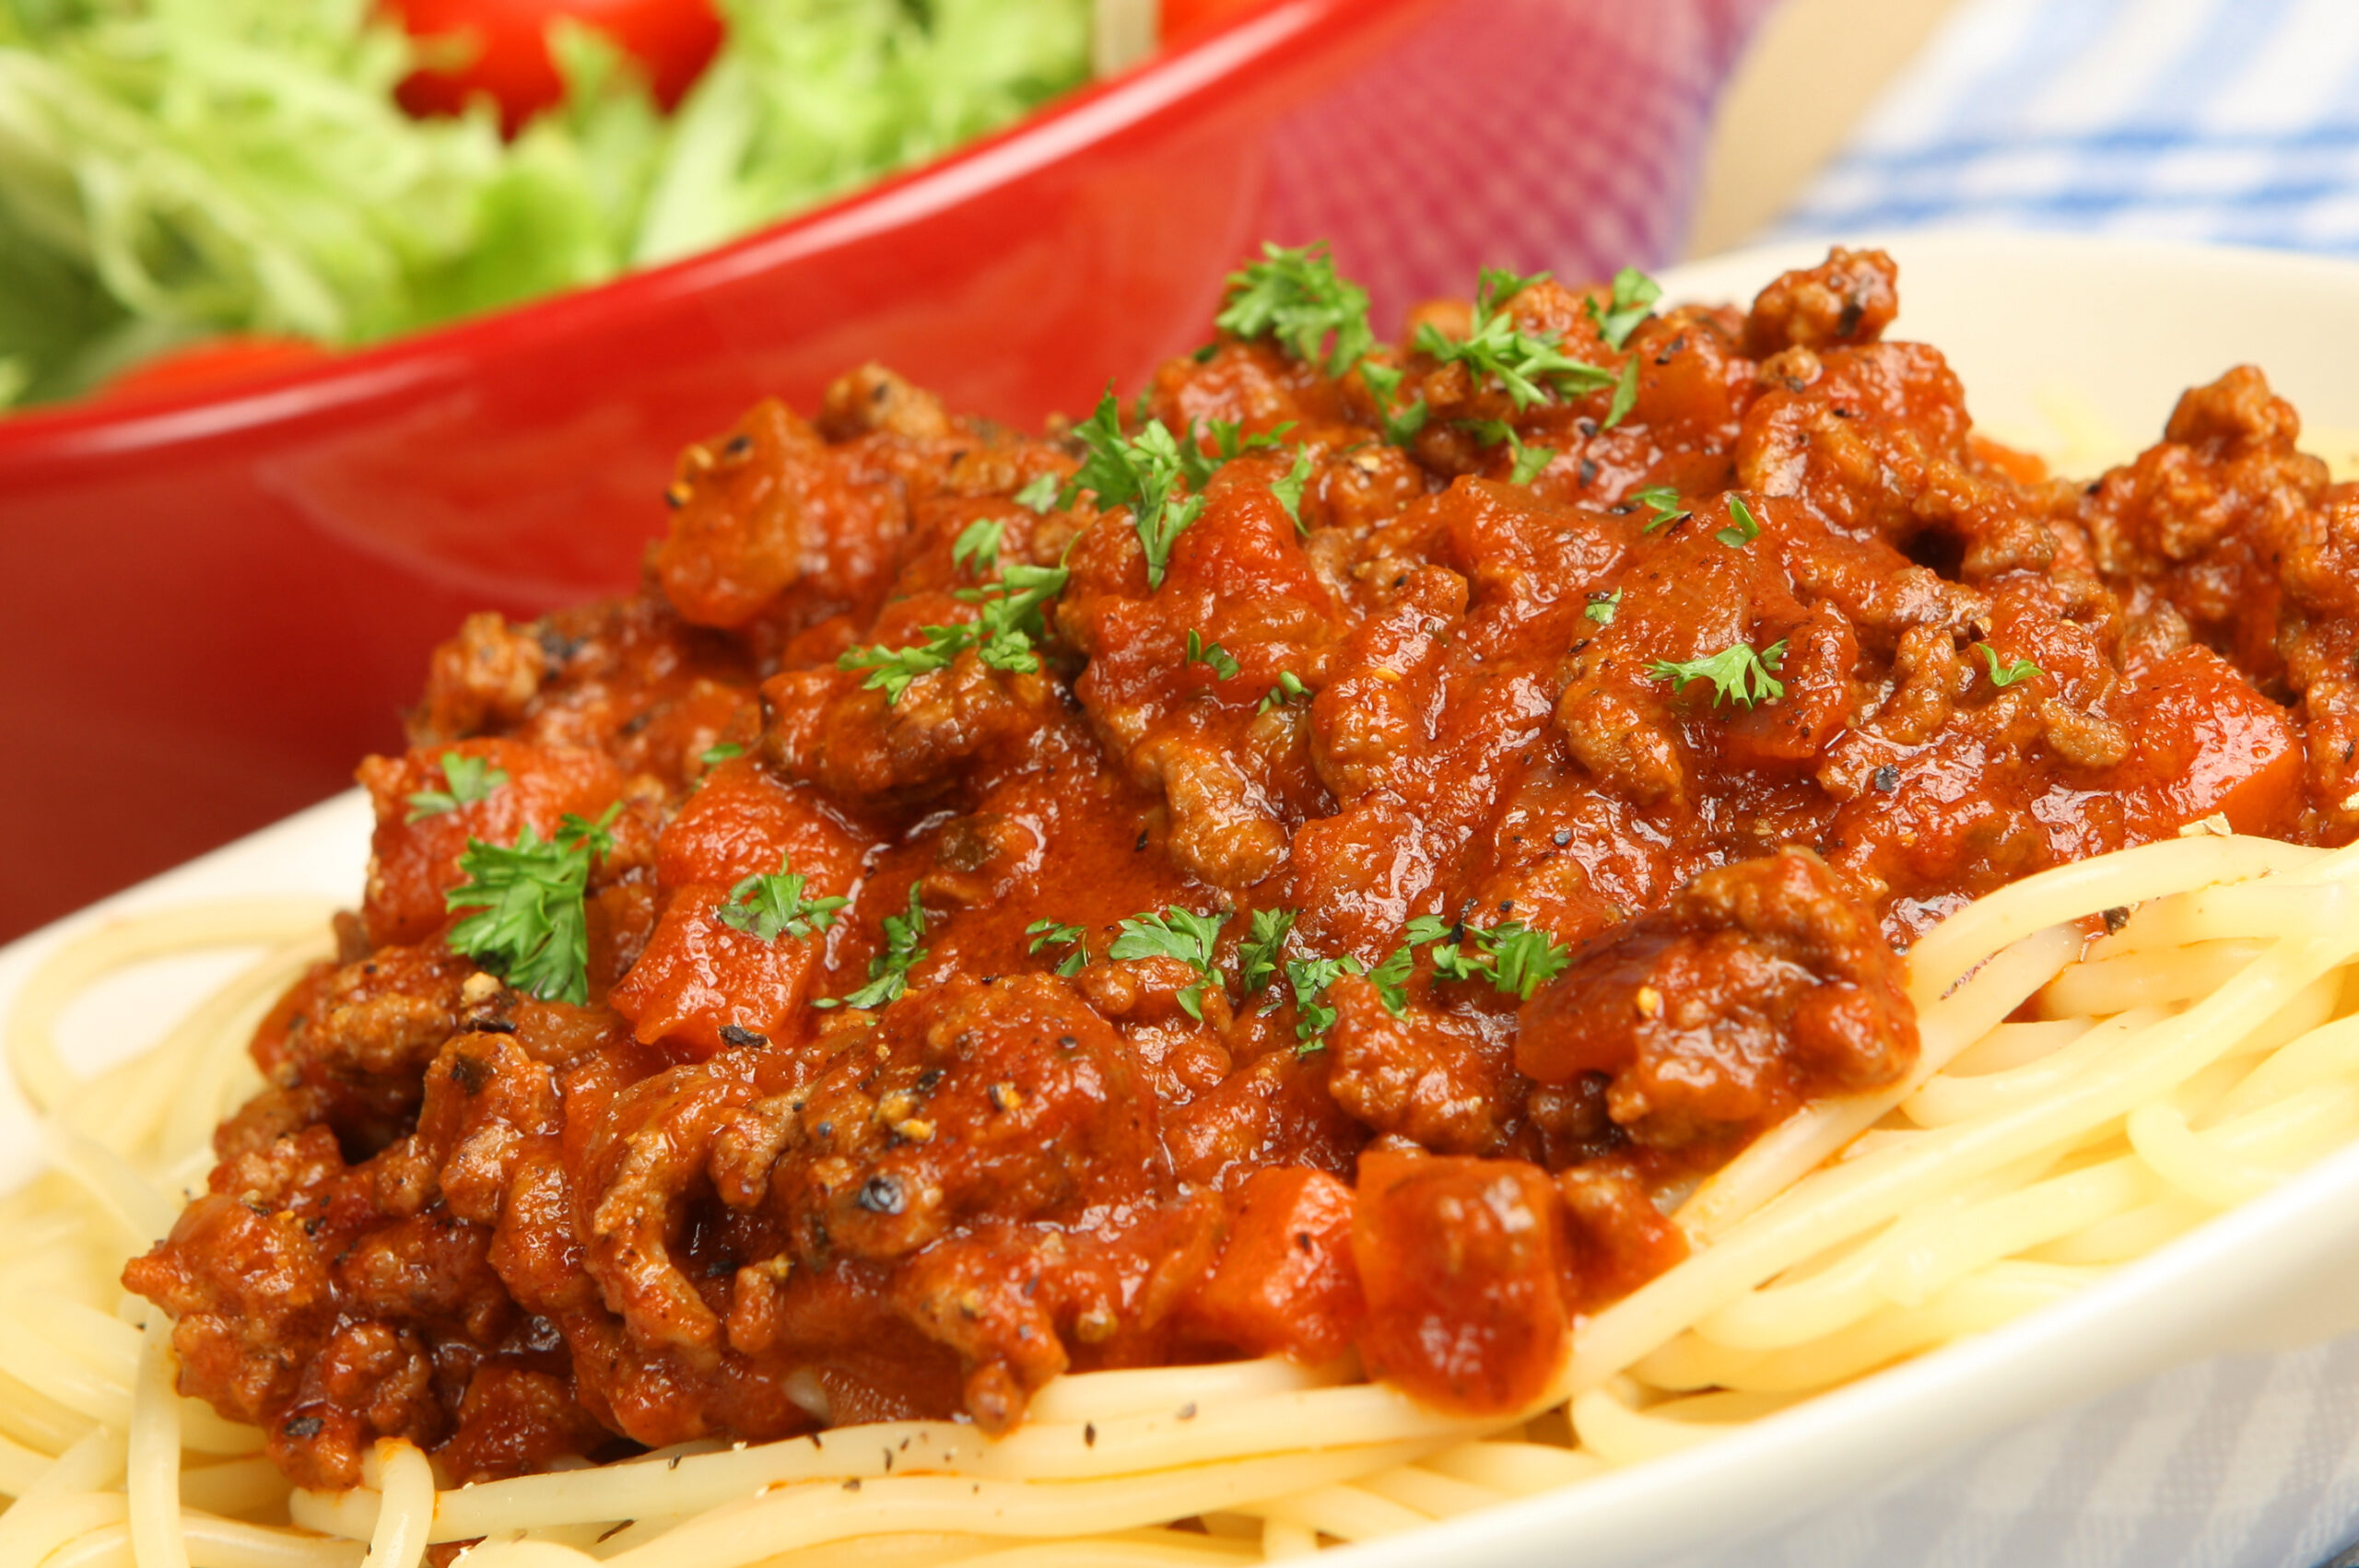 Spaghetti bolognese with side salad